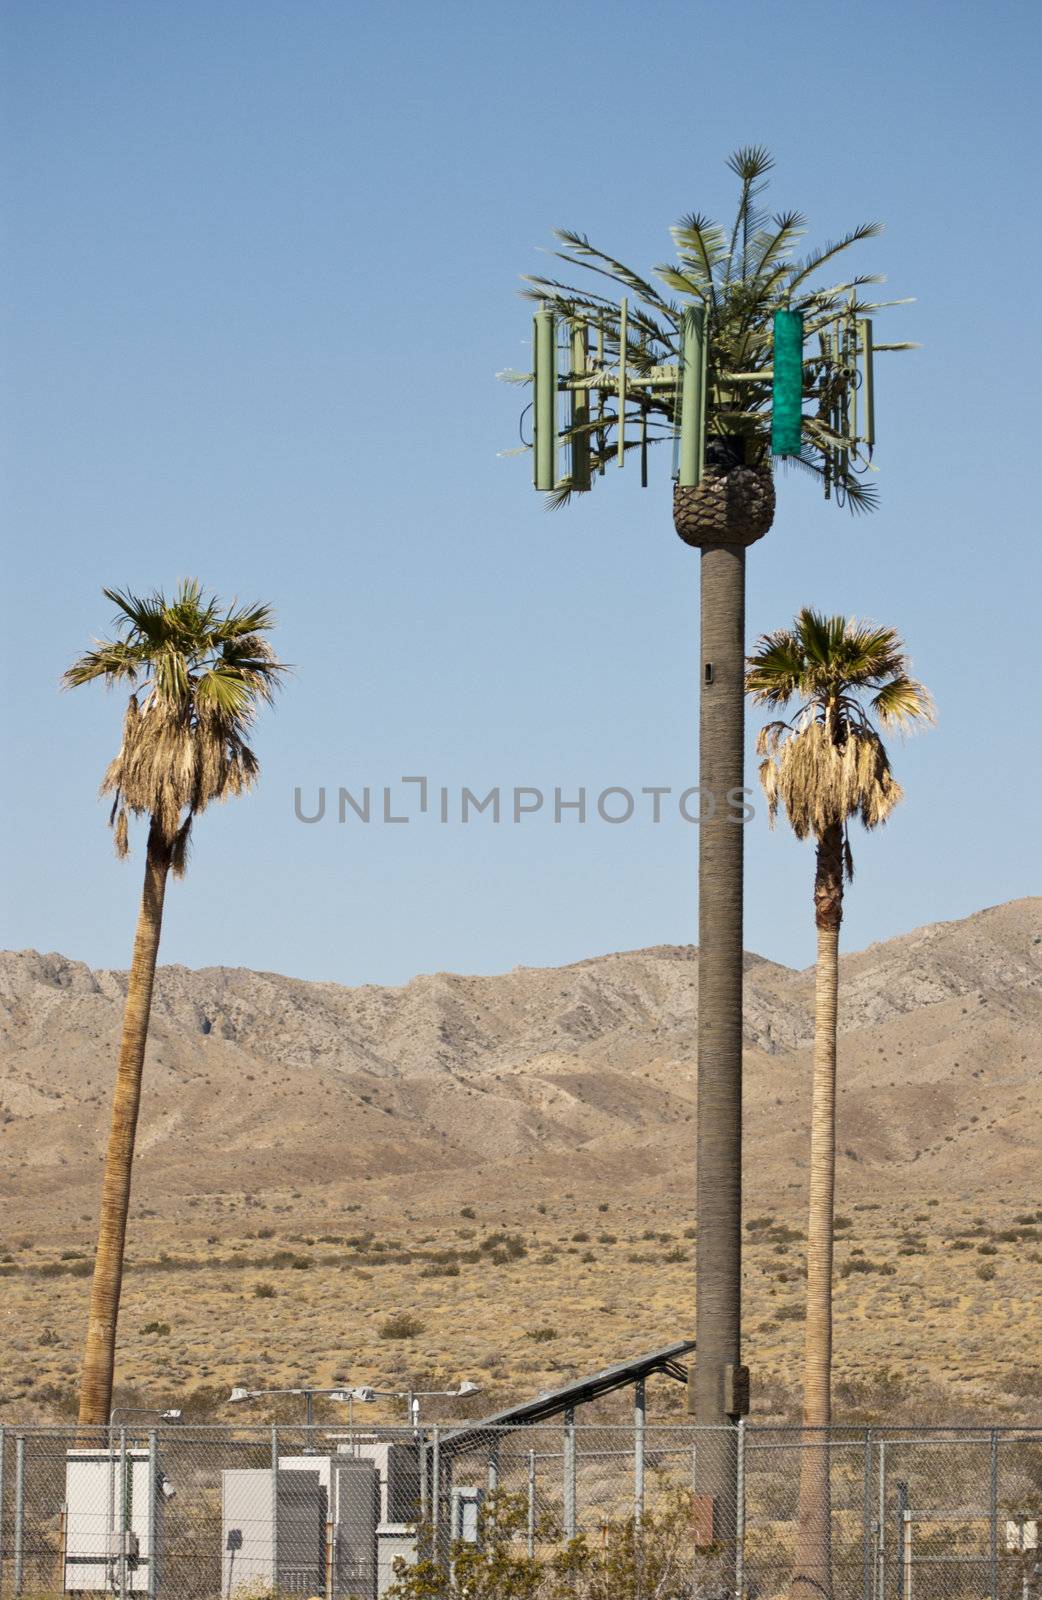 Cellular phone antenna towers disguised as a palm tree